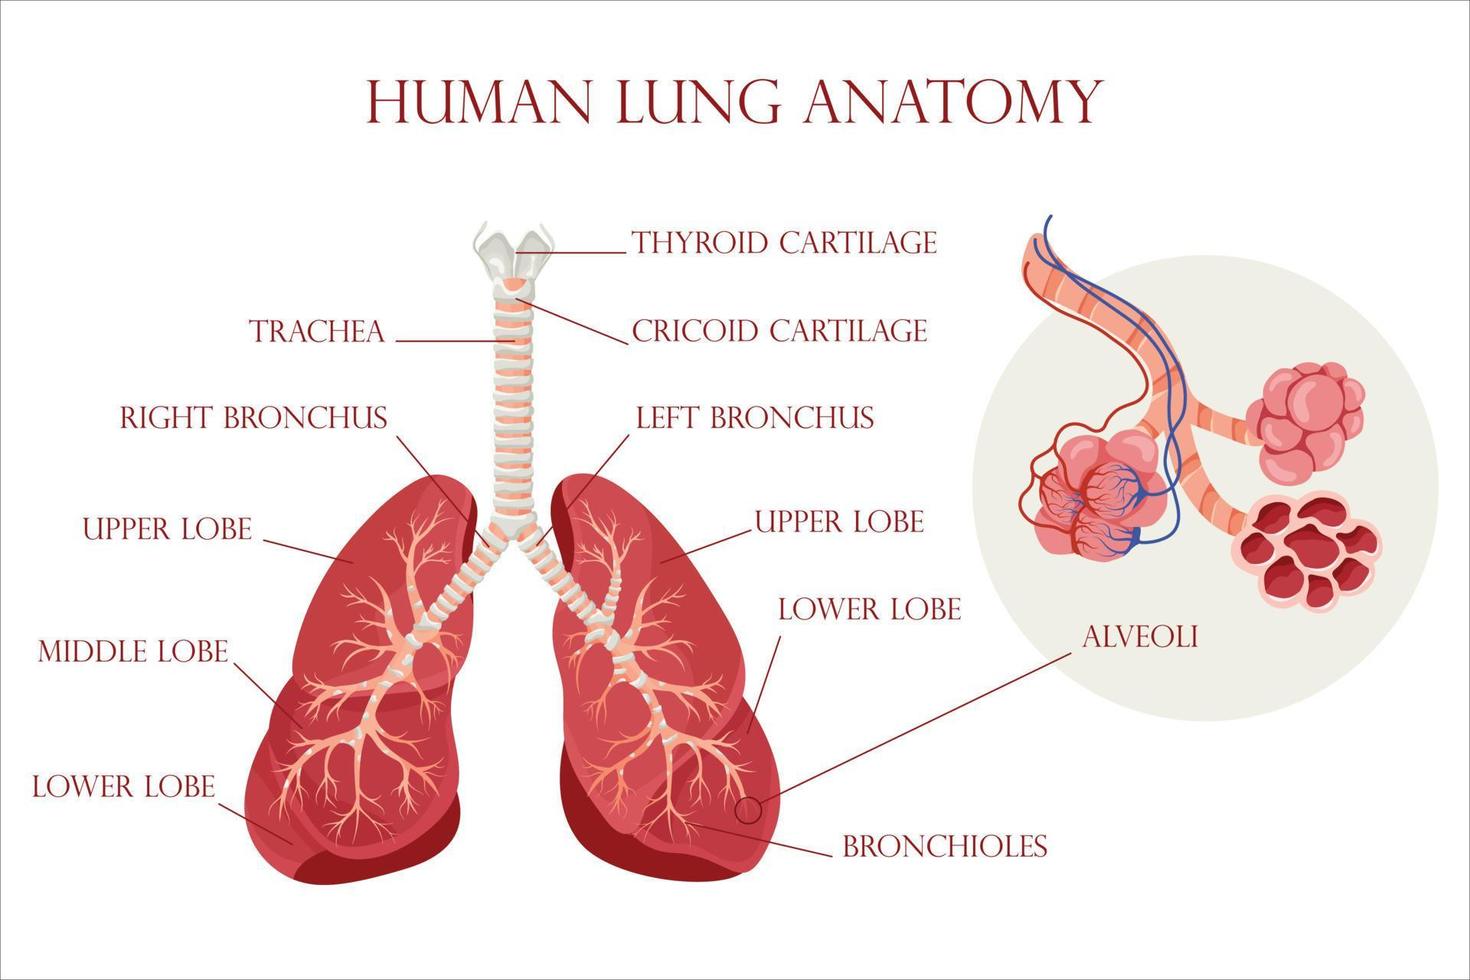 Anatomy lungs and alveoli. The air space in the lungs through which oxygen and carbon dioxide are exchanged. Vector illustration.